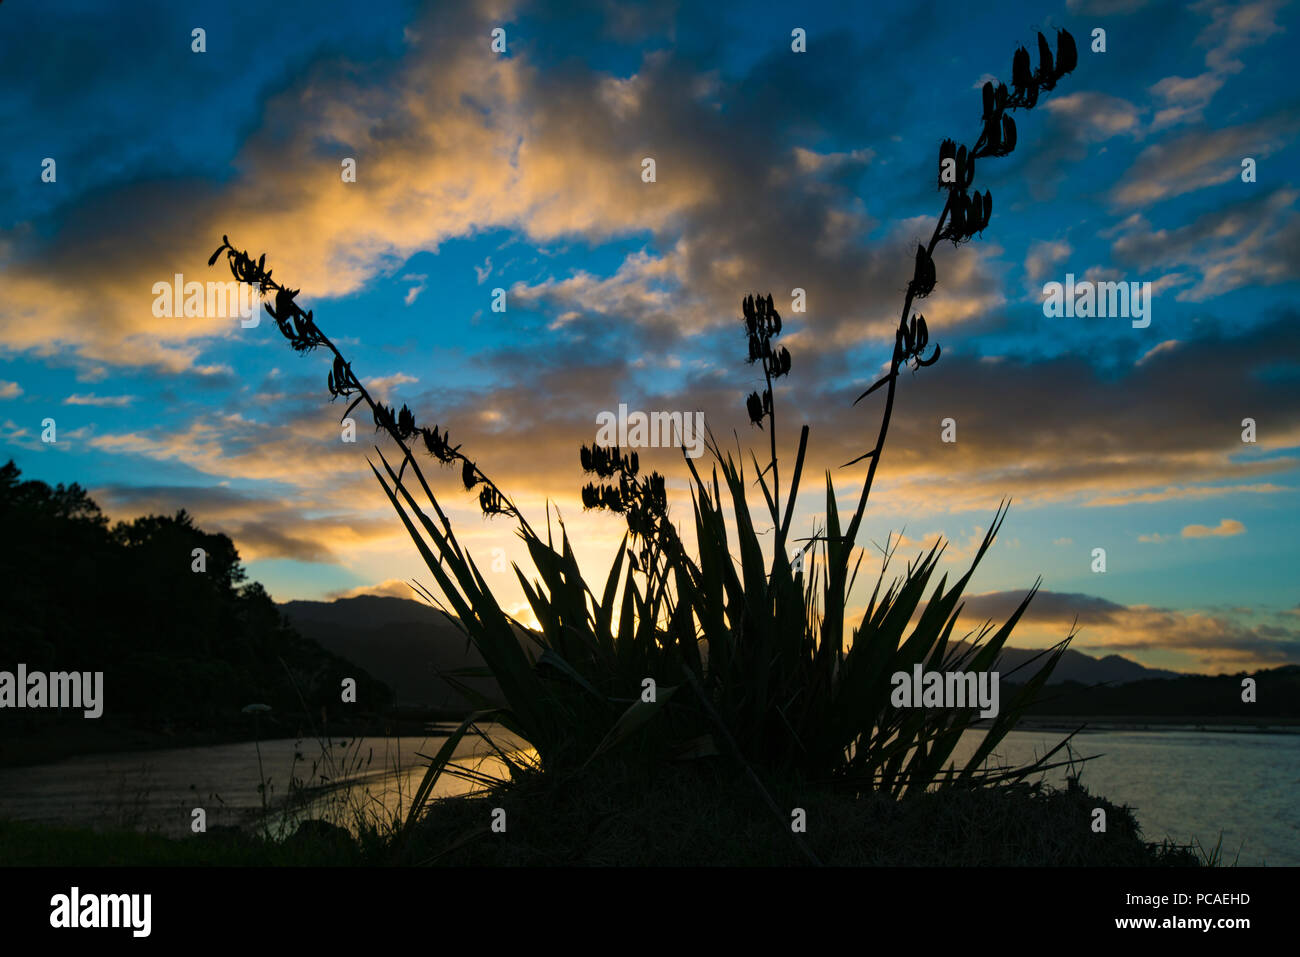 Silhouette of plants at sunset Stock Photo